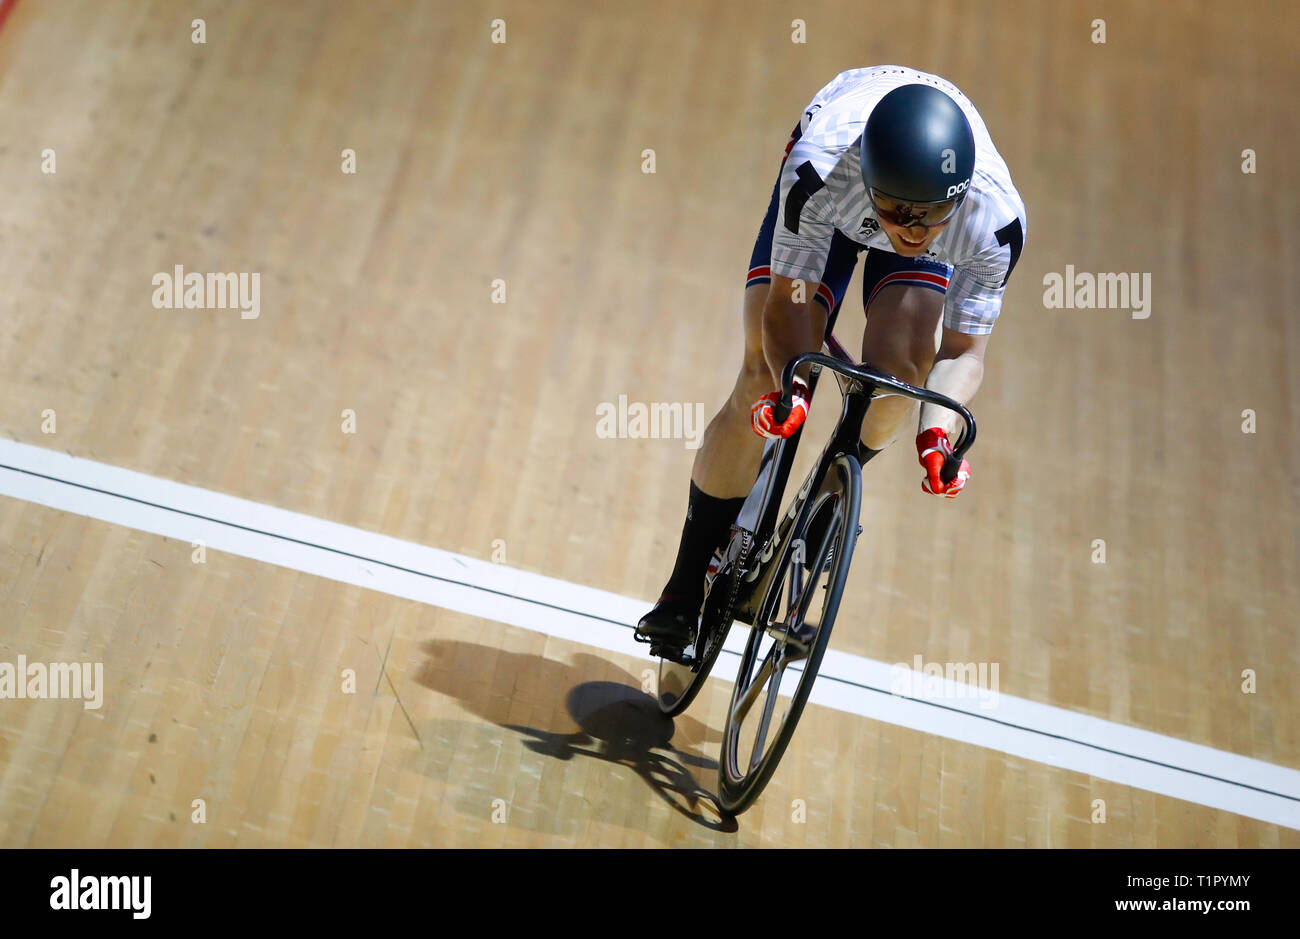 Jason Kelly in the Men's Sprinters General Classification race during day two of the Six Day Series Manchester at the HSBC UK National Cycling Centre. Stock Photo